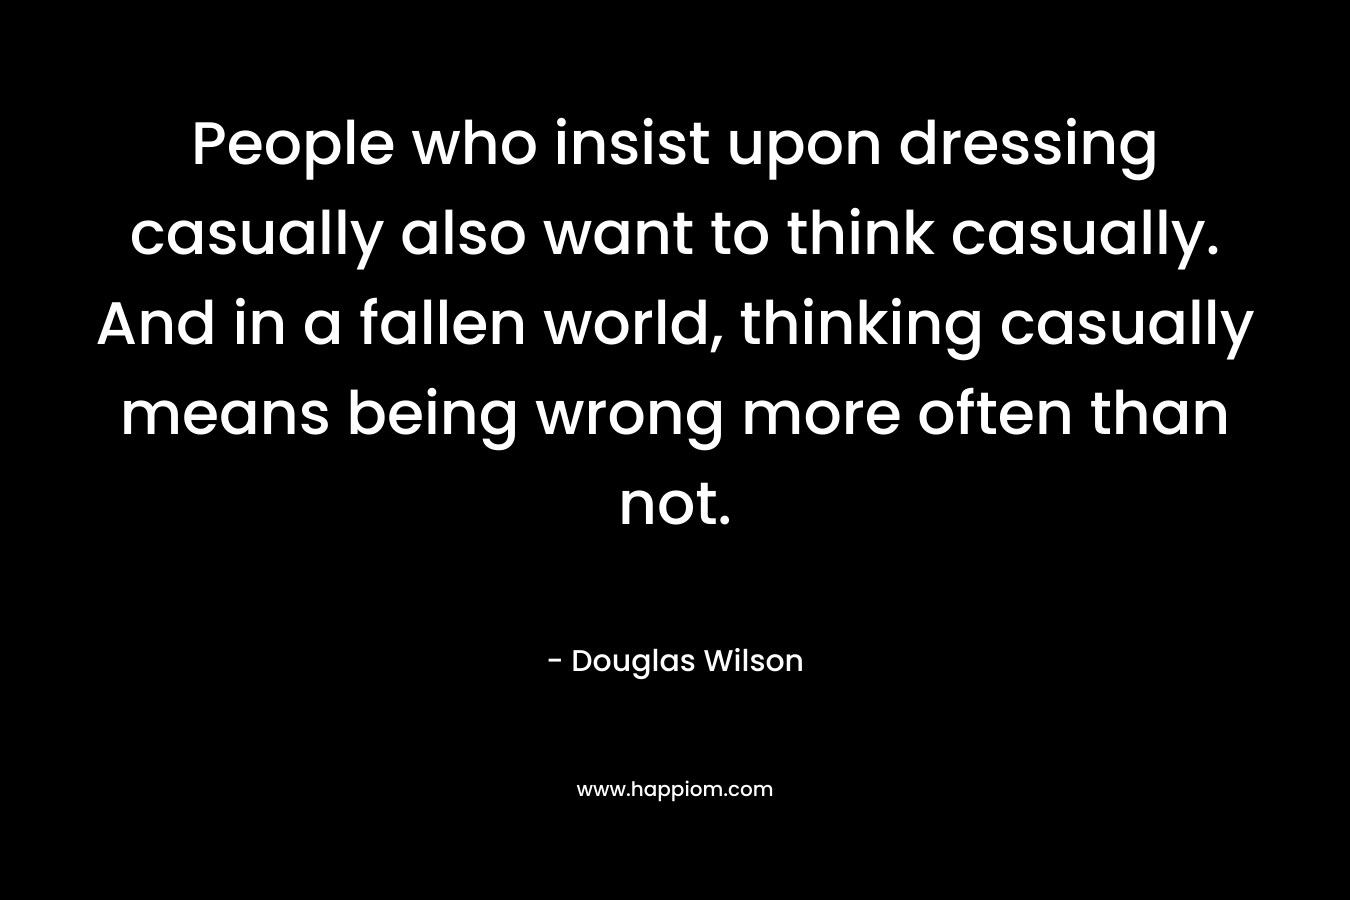 People who insist upon dressing casually also want to think casually. And in a fallen world, thinking casually means being wrong more often than not. – Douglas Wilson